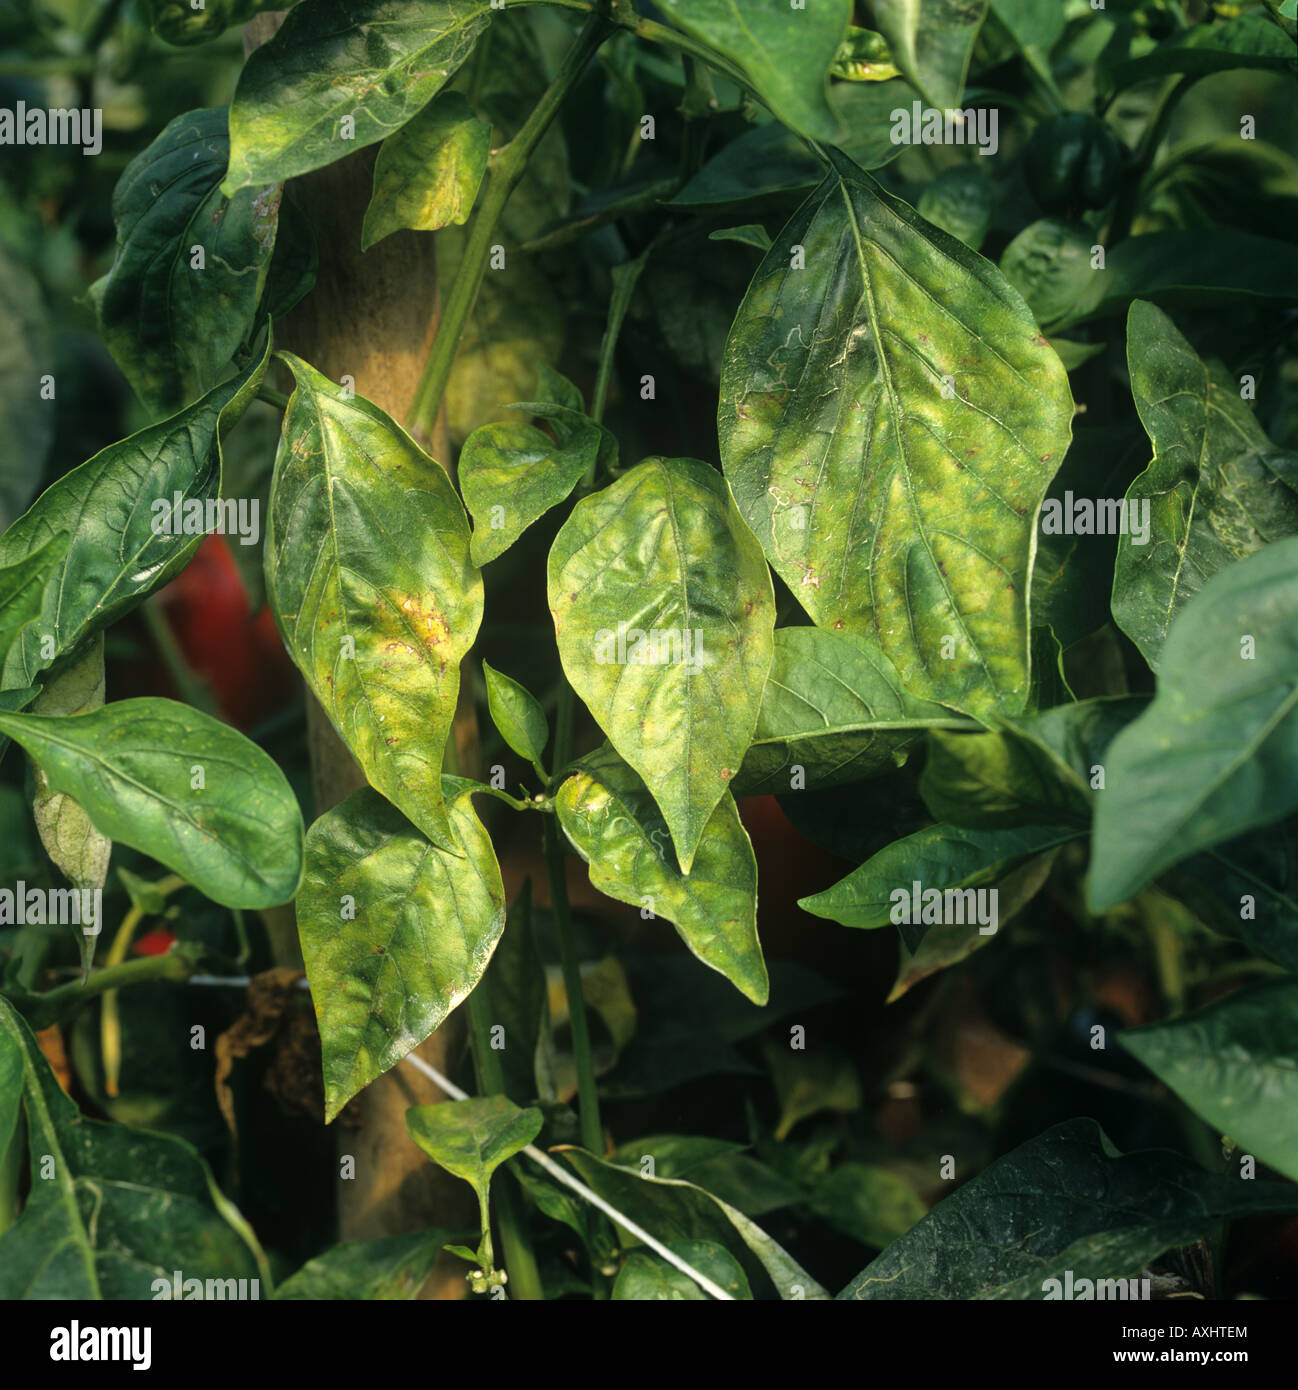 Powdery mildew Leveillula taurica infection on sweet pepper leaf Portugal Stock Photo